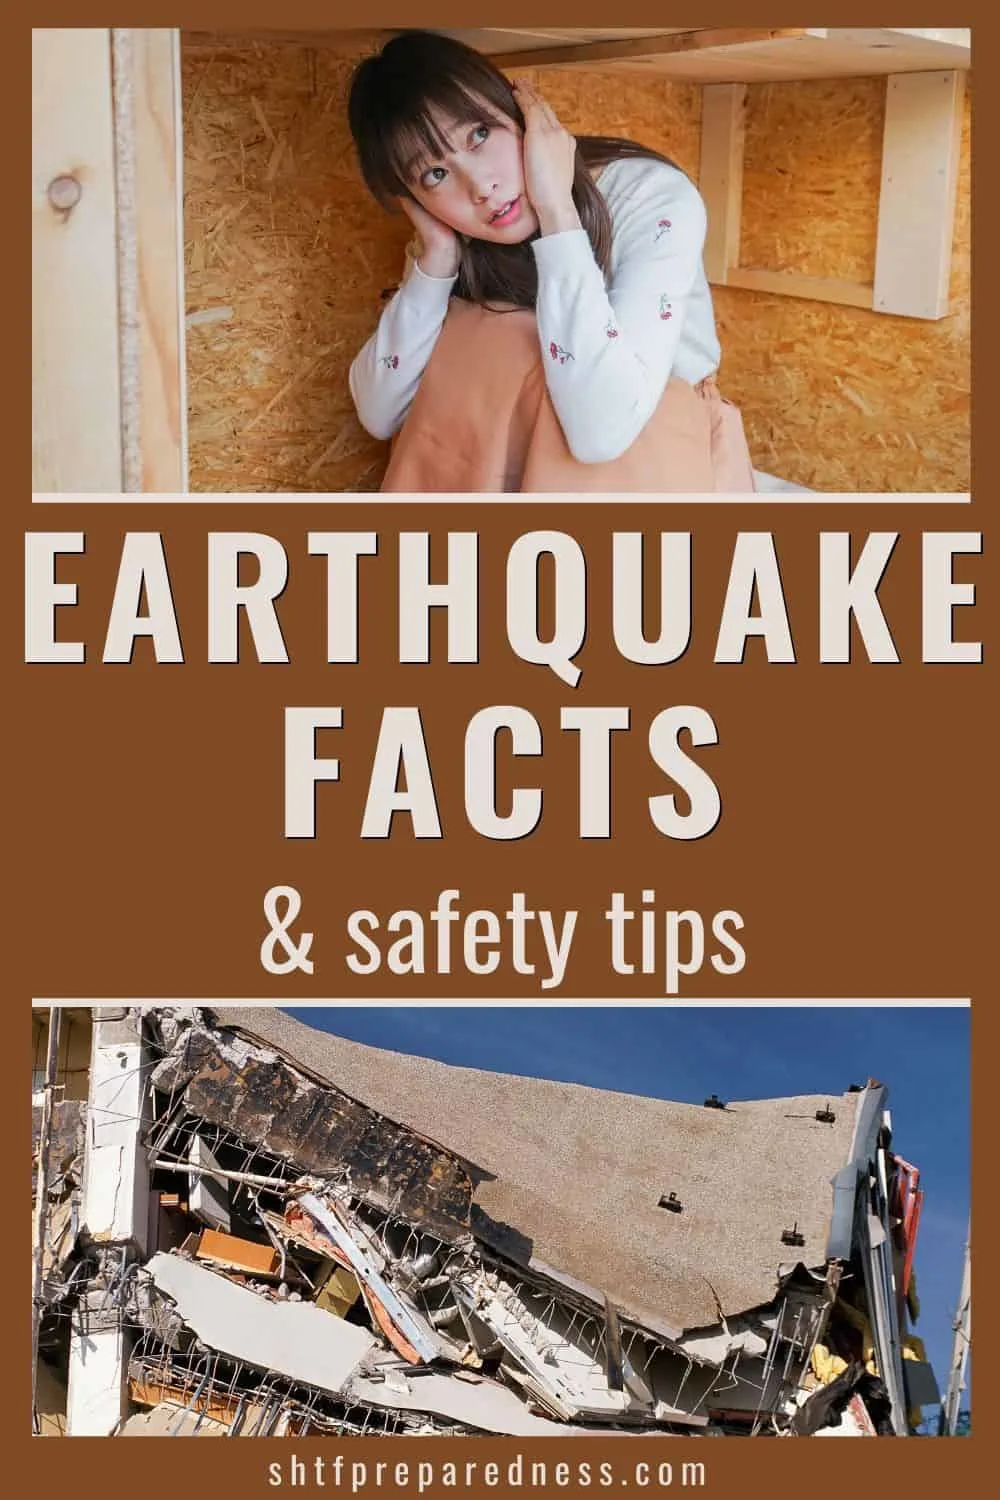 Earthquake facts and tips